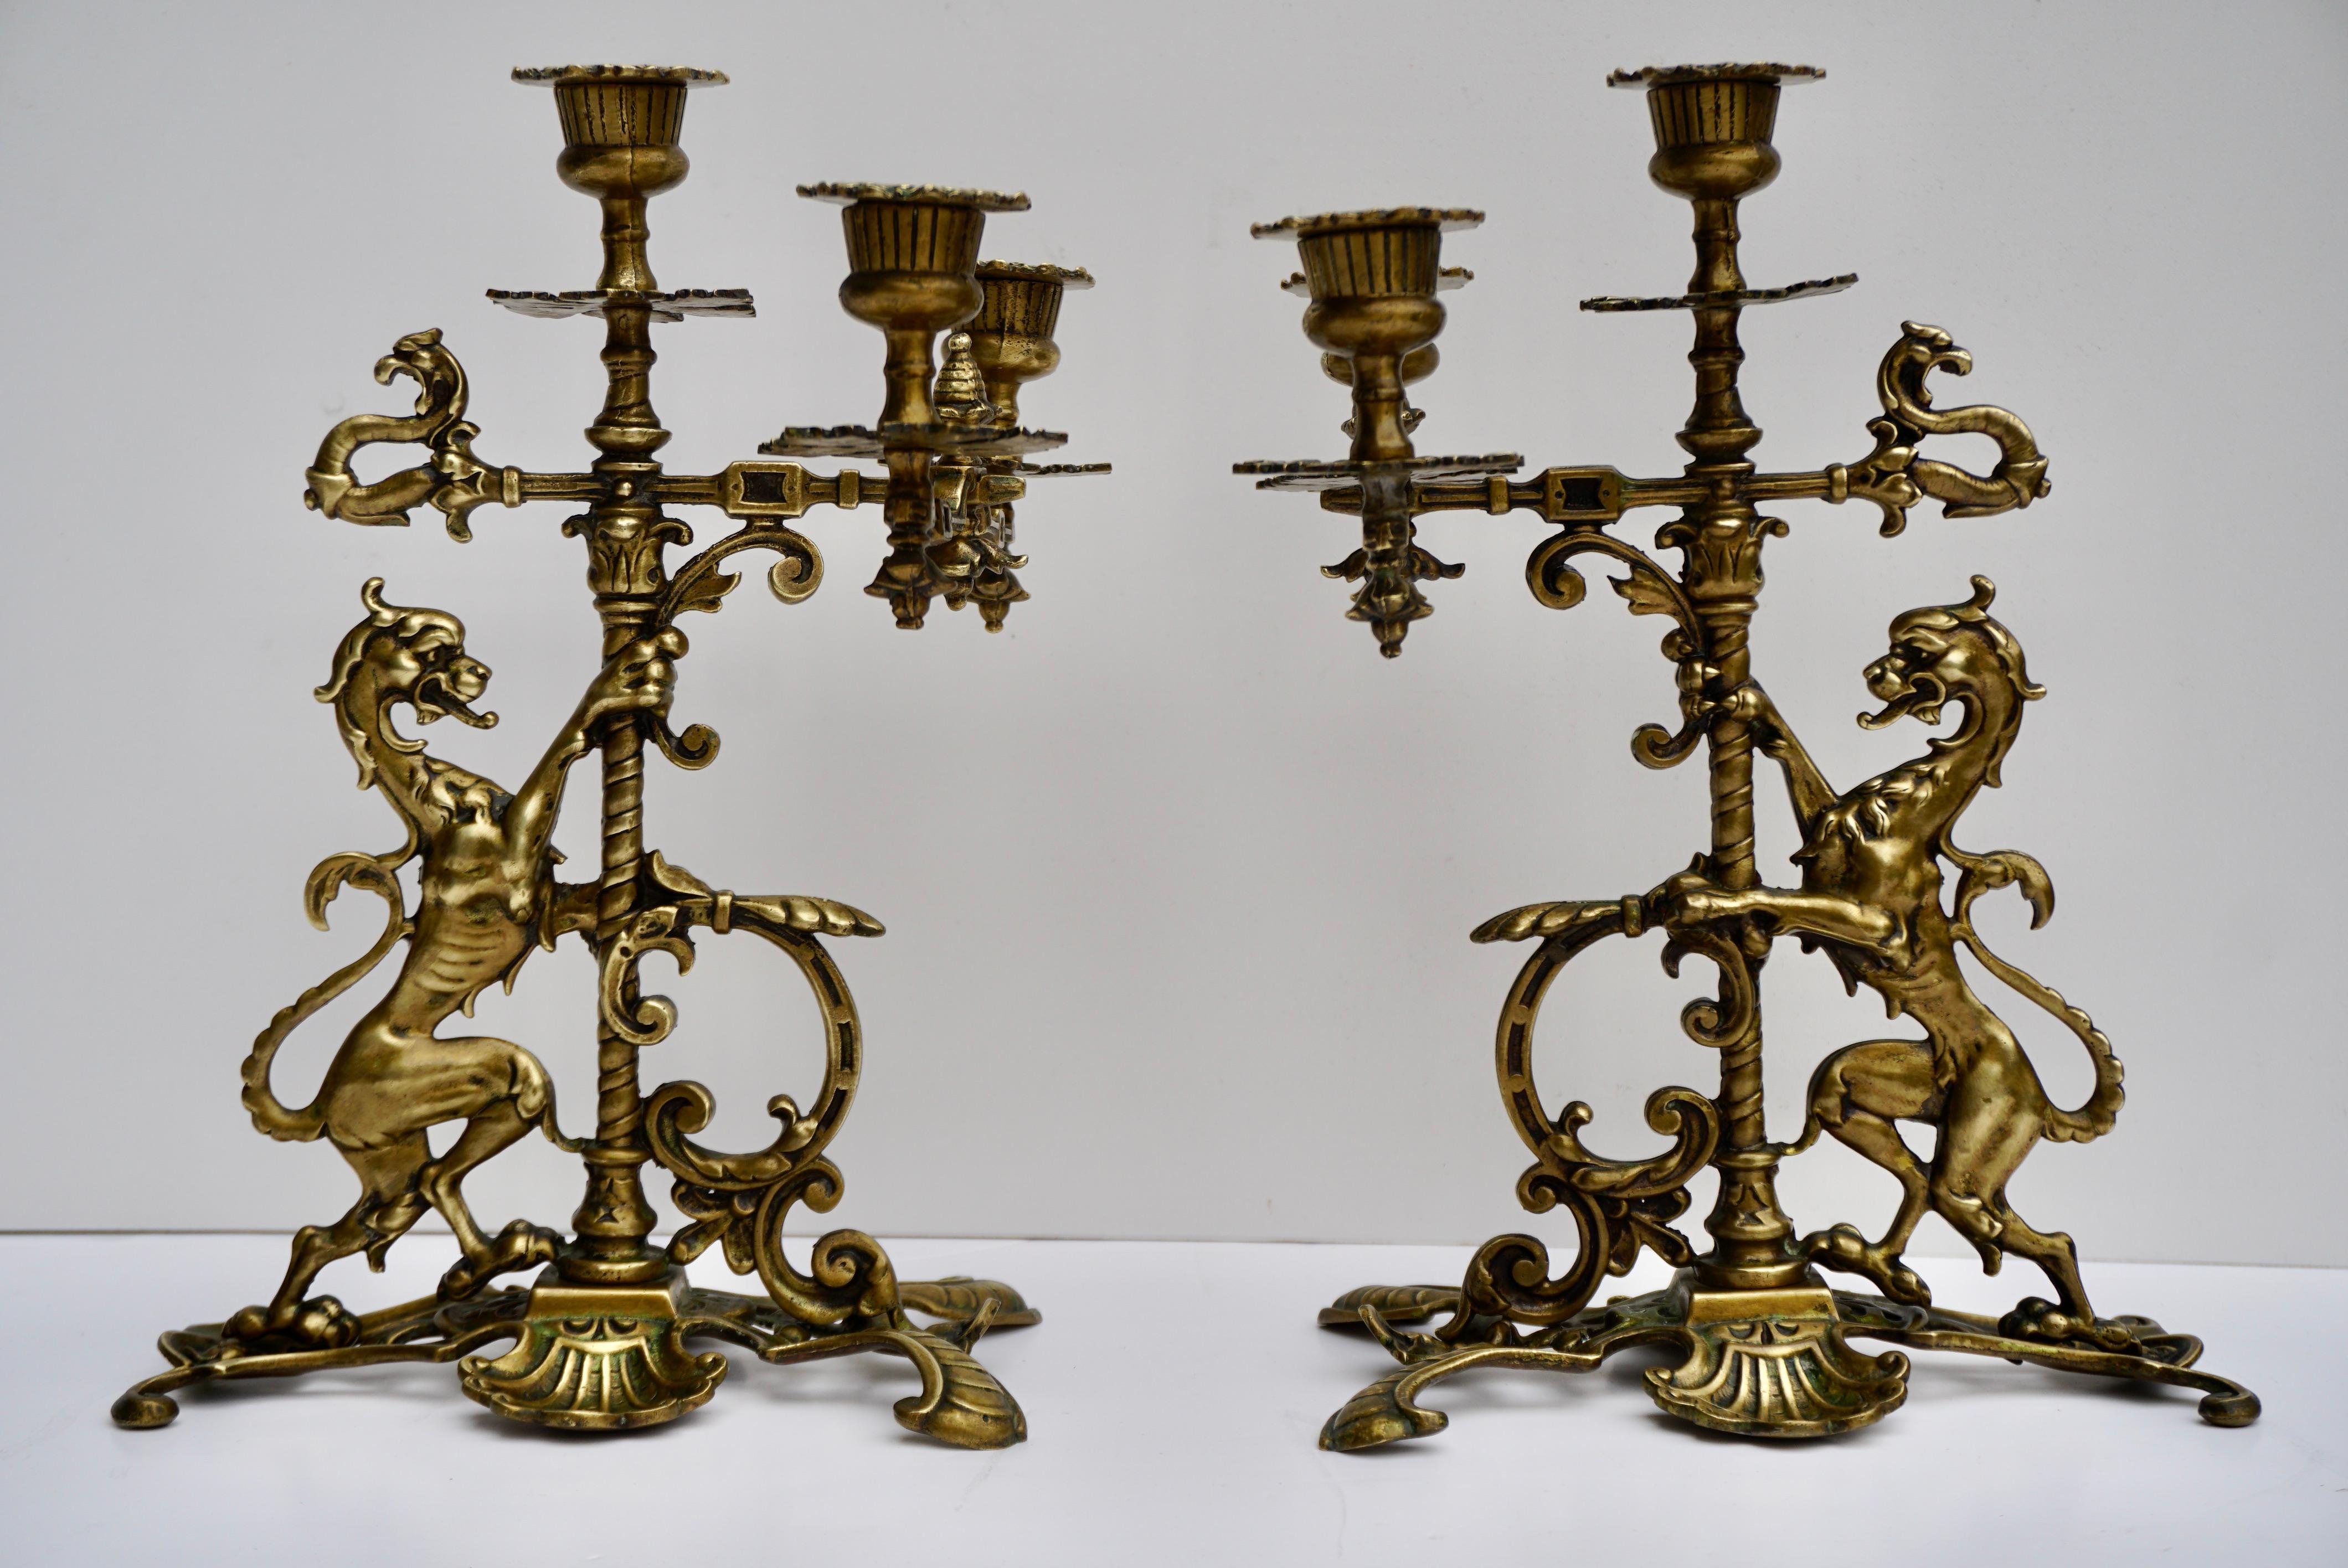 Two very beautiful exclusive brass candlesticks with 2 arms for 3 candles. Very richly decorated with beautiful dragons. These Antique candlesticks are Solid Brass with a 2 dragon / serpent creature motif and lion paw feet. This pair is very unusual